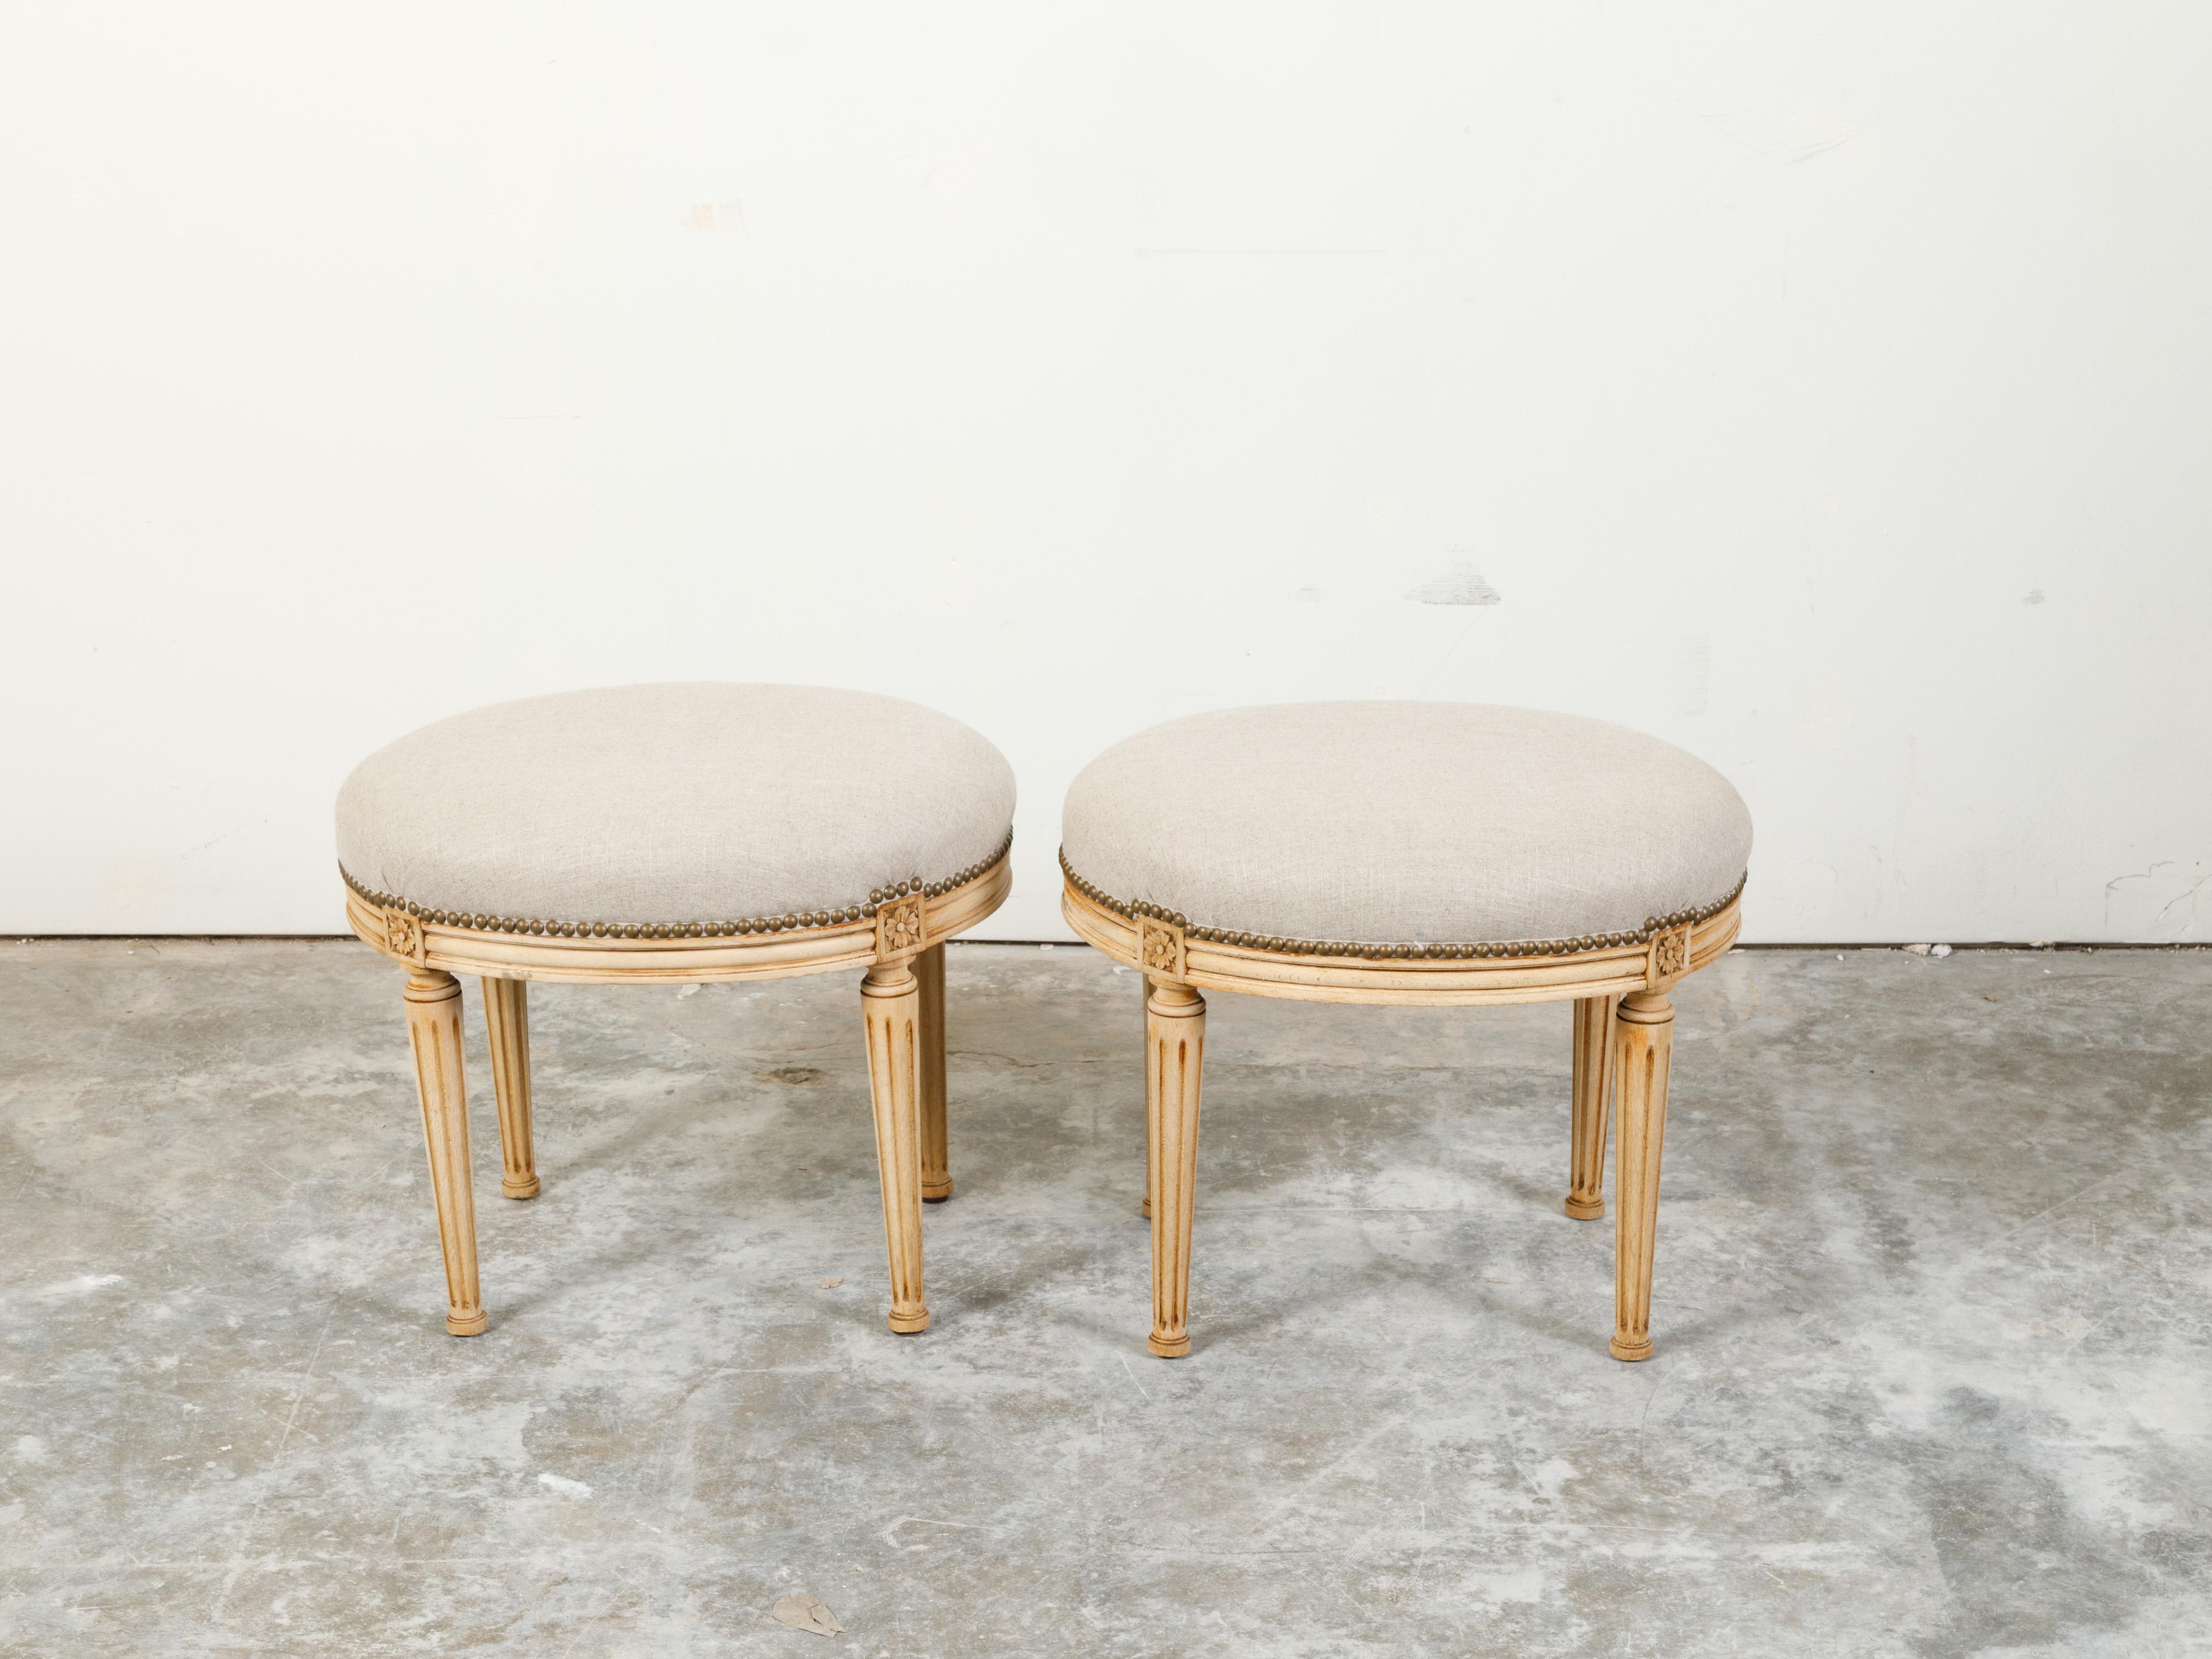 A pair of French neoclassical style bleached wood stools from the early 20th century, with fluted legs and new upholstery. Created in France during the second quarter of the 20th century, each of this pair of stools features a top newly